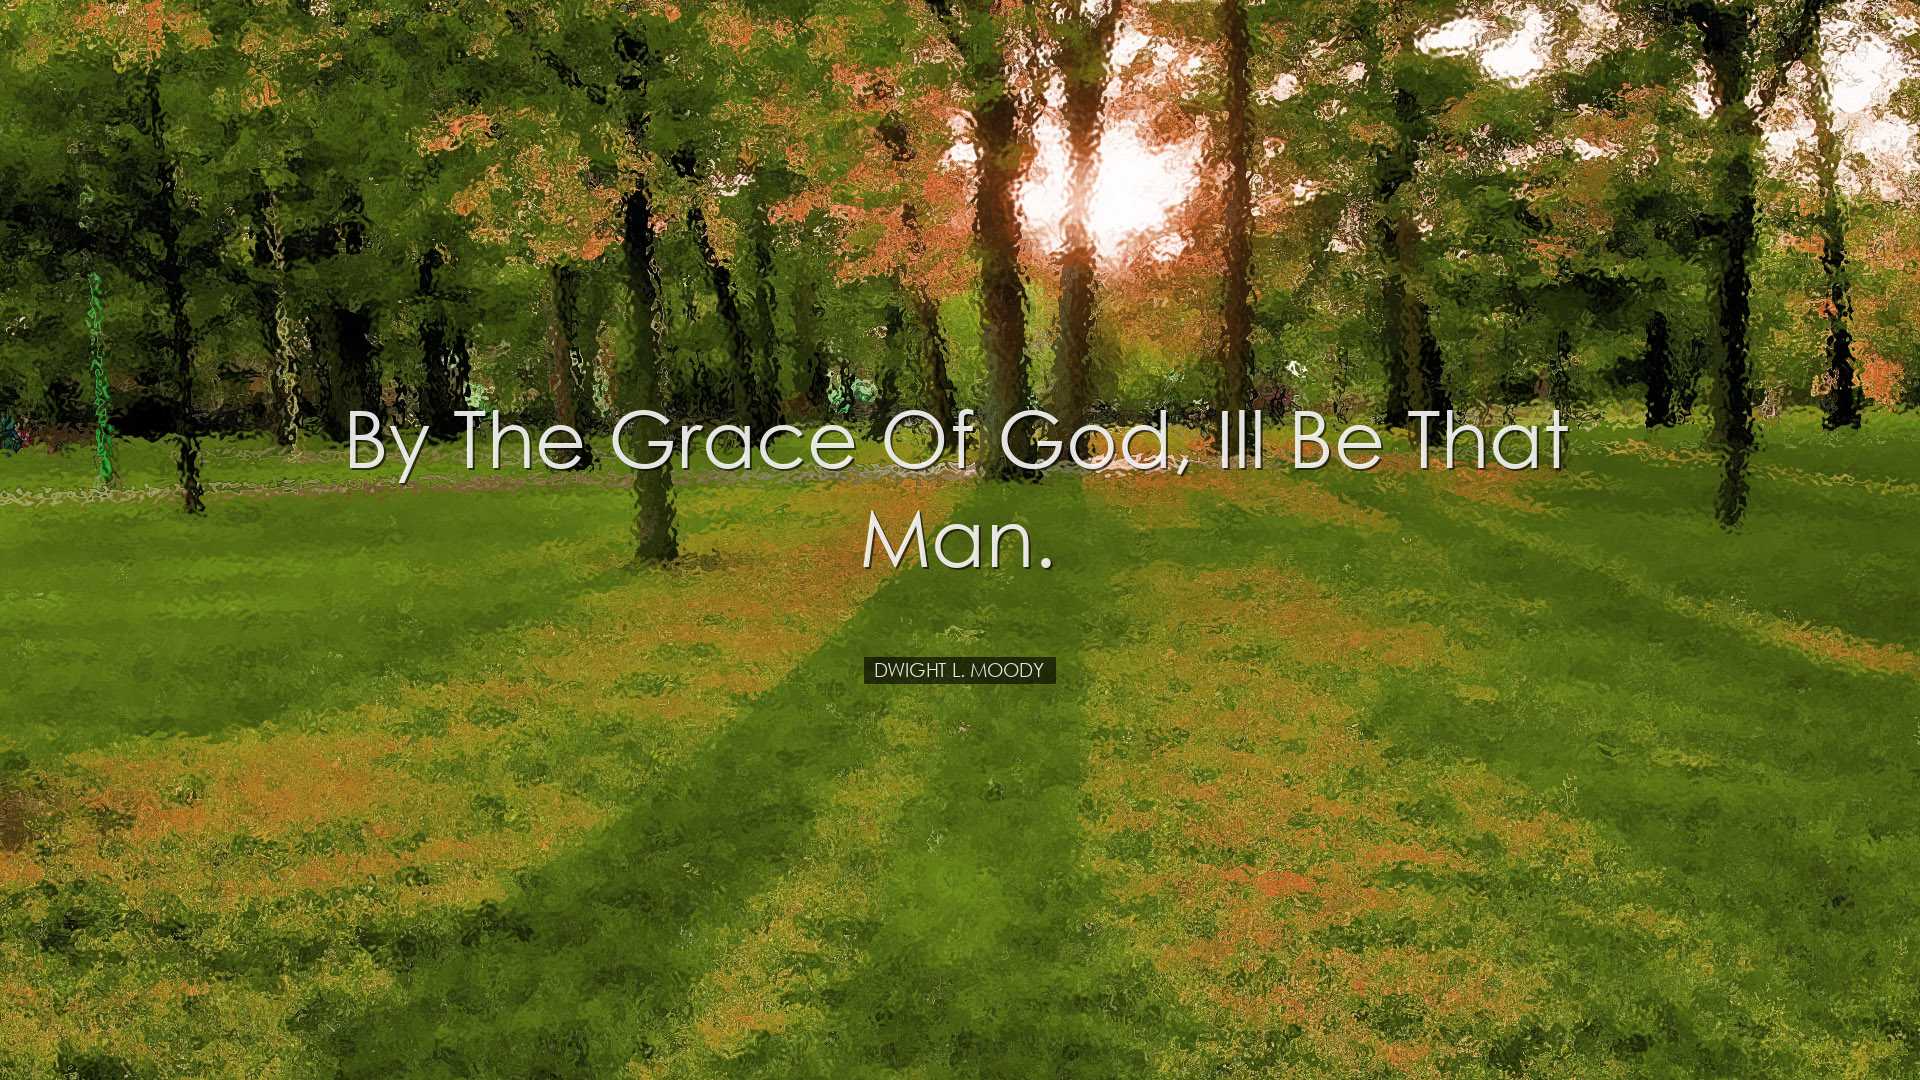 By the grace of God, Ill be that man. - Dwight L. Moody